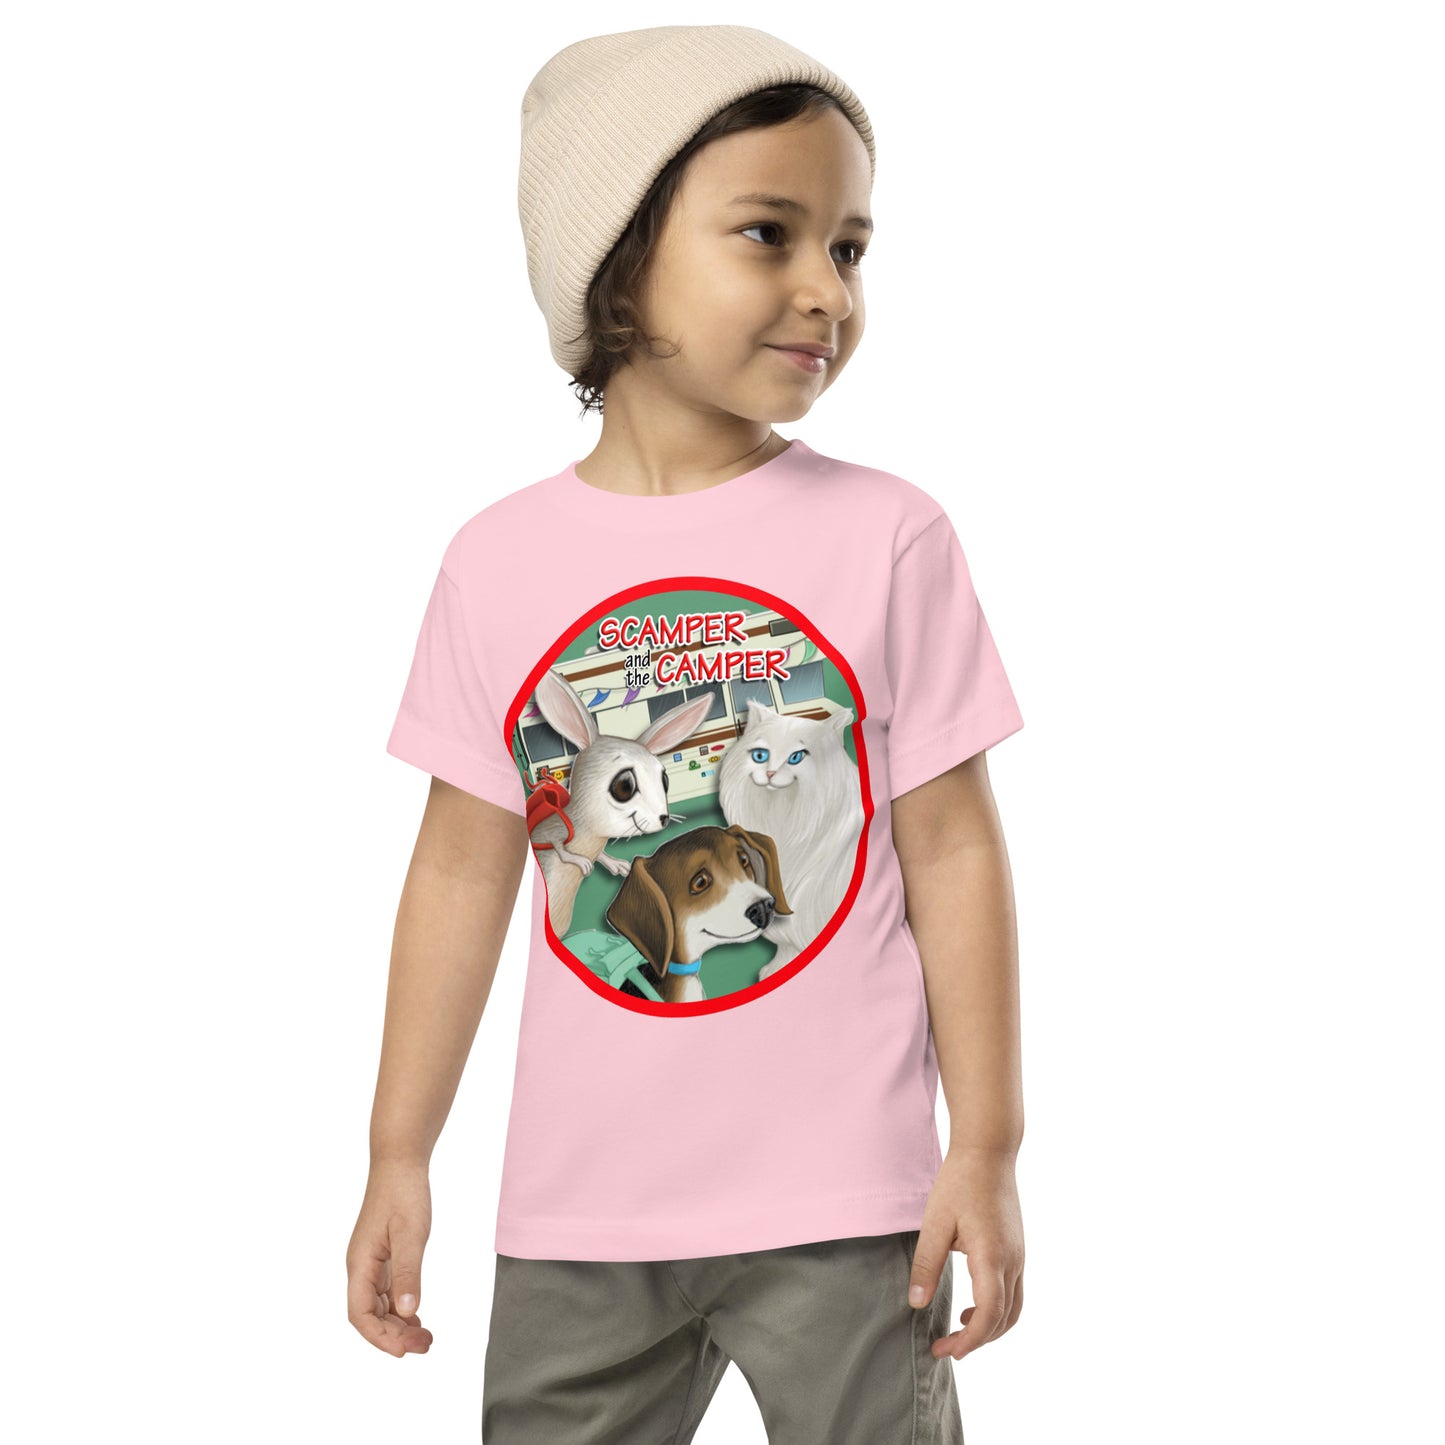 Scamper and the Camper  Toddler RV Tee